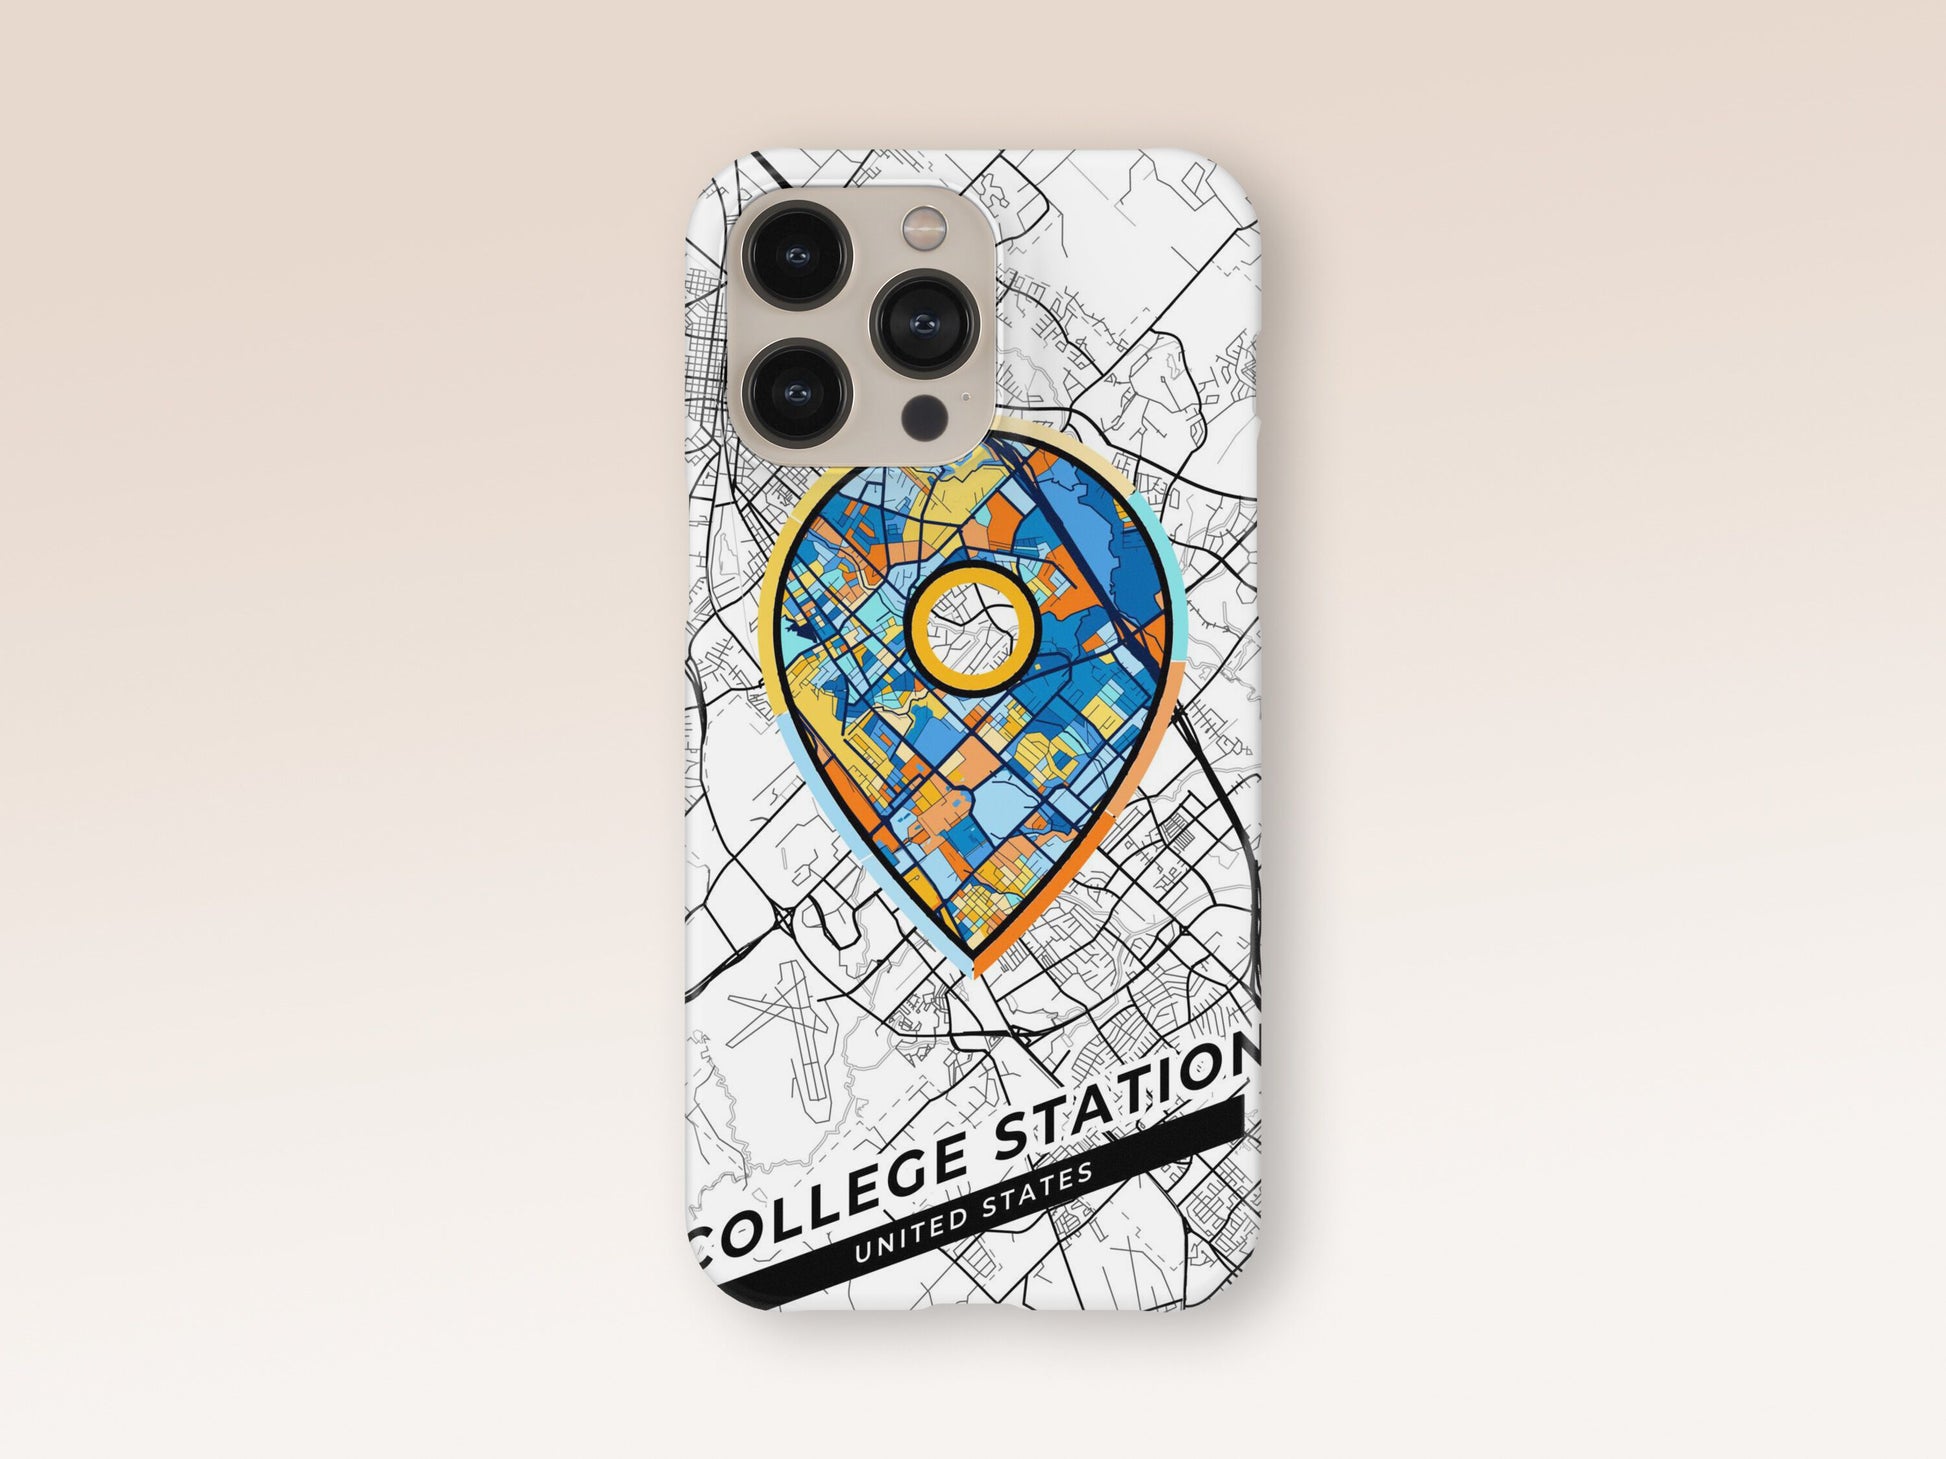 College Station Texas slim phone case with colorful icon. Birthday, wedding or housewarming gift. Couple match cases. 1